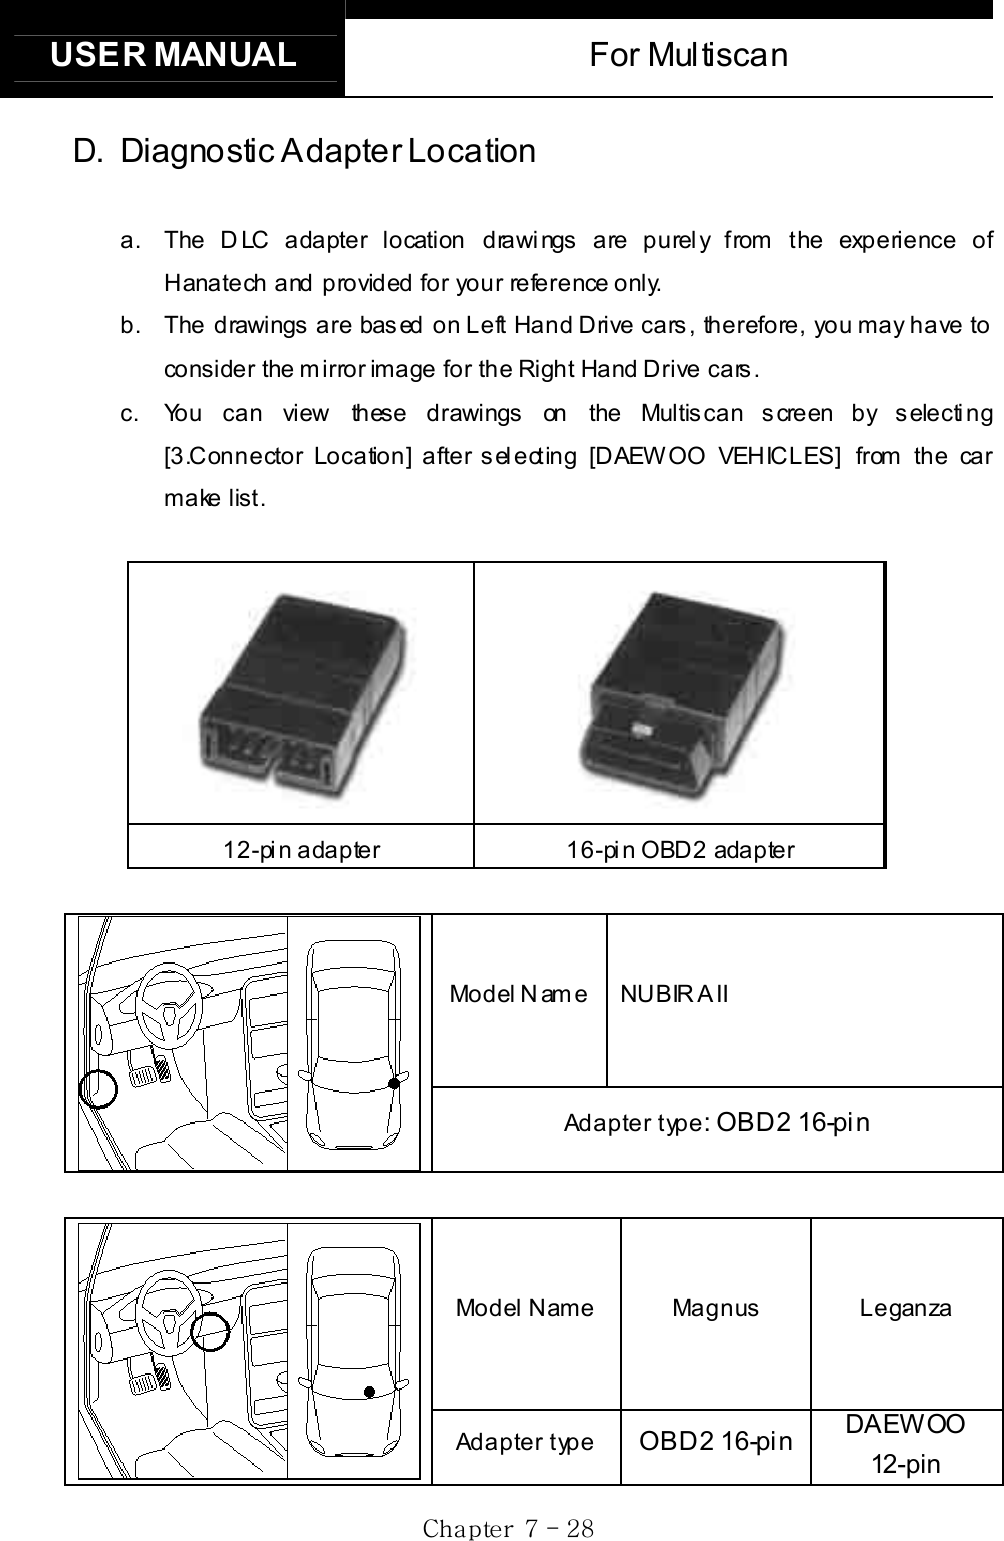 USER MANUAL  For Multiscan Gj  G^G TGY_GD. Diagnostic Adapter Location a.  The DLC adapter location drawings are purely from the experience of Hanatech and provided for your reference only. b.  The drawings are based on Left Hand Drive cars, therefore, you may have to consider the mirror image for the Right Hand Drive cars.     c.  You can view these drawings on the Multiscan screen by selecting [3.Connector Location] after selecting [DAEWOO VEHICLES] from the car make list. 12-pin adapter  16-pin OBD2 adapter Model Name  NUBIRA  II Adapter type: OBD2 16-pin   Model Name  Magnus  Leganza Adapter type  OBD2 16-pin DAEWOO  12-pin